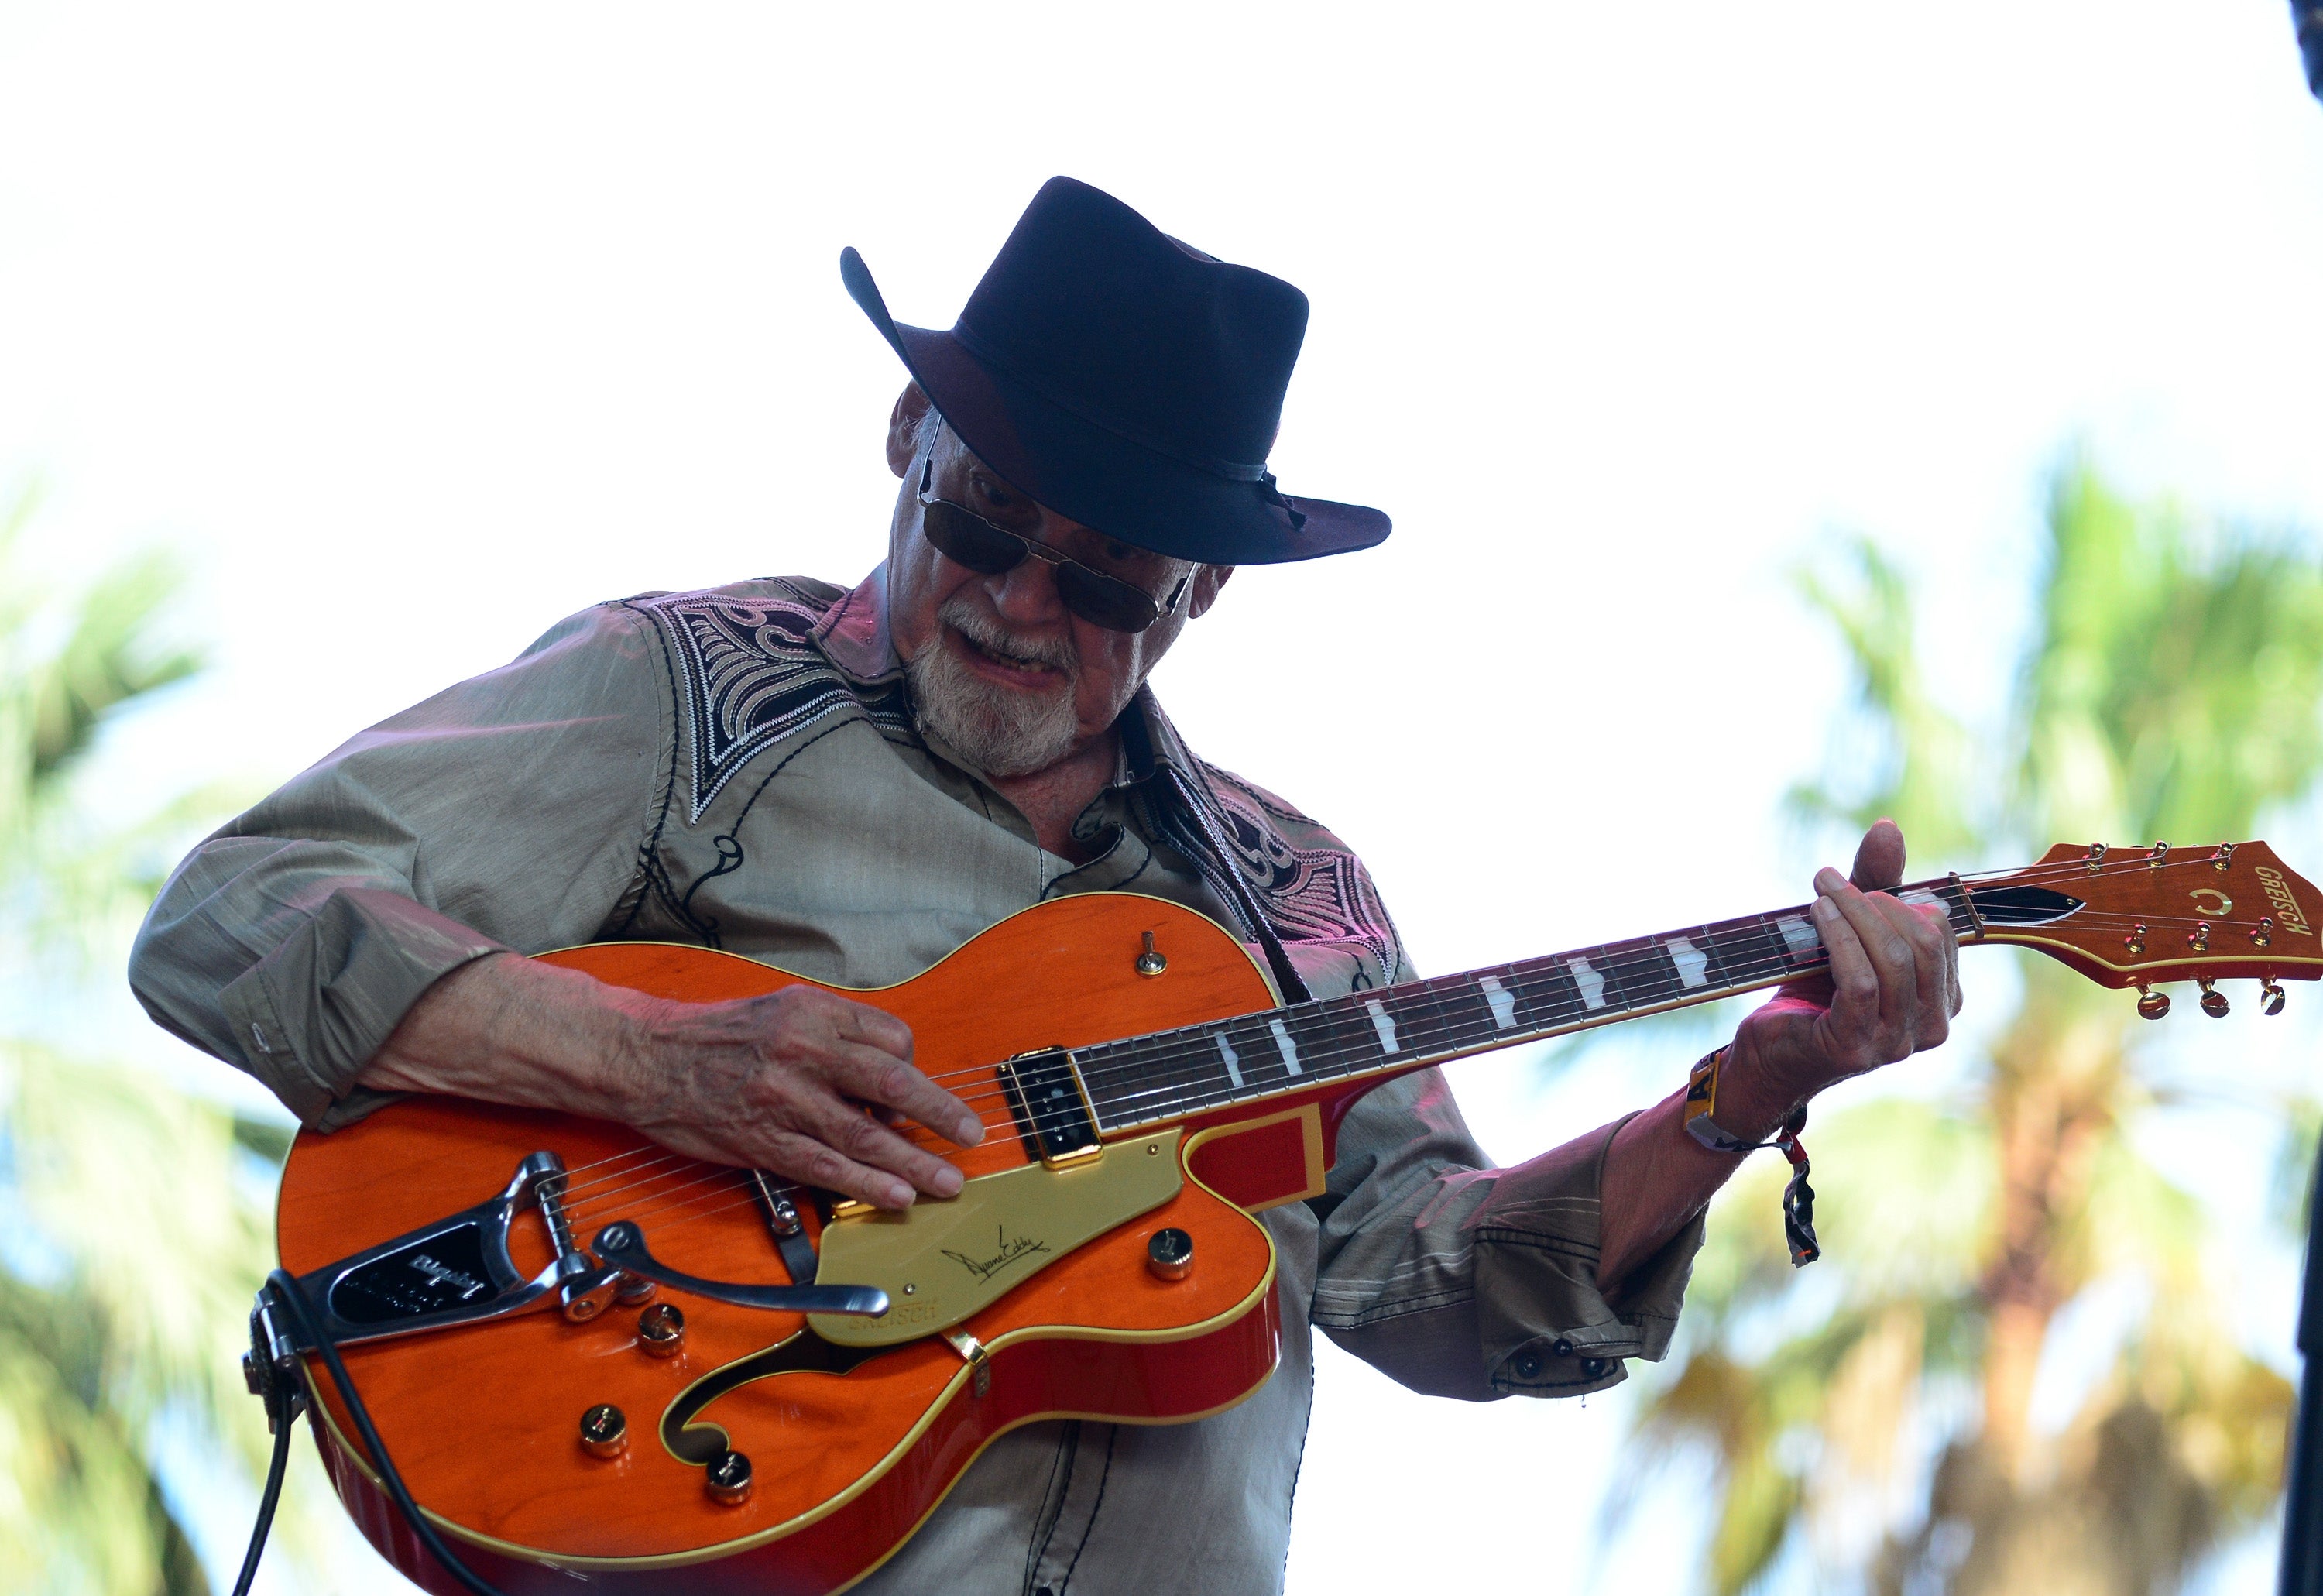 Duane Eddy onstage at the Stagecoach festival in California in 2014